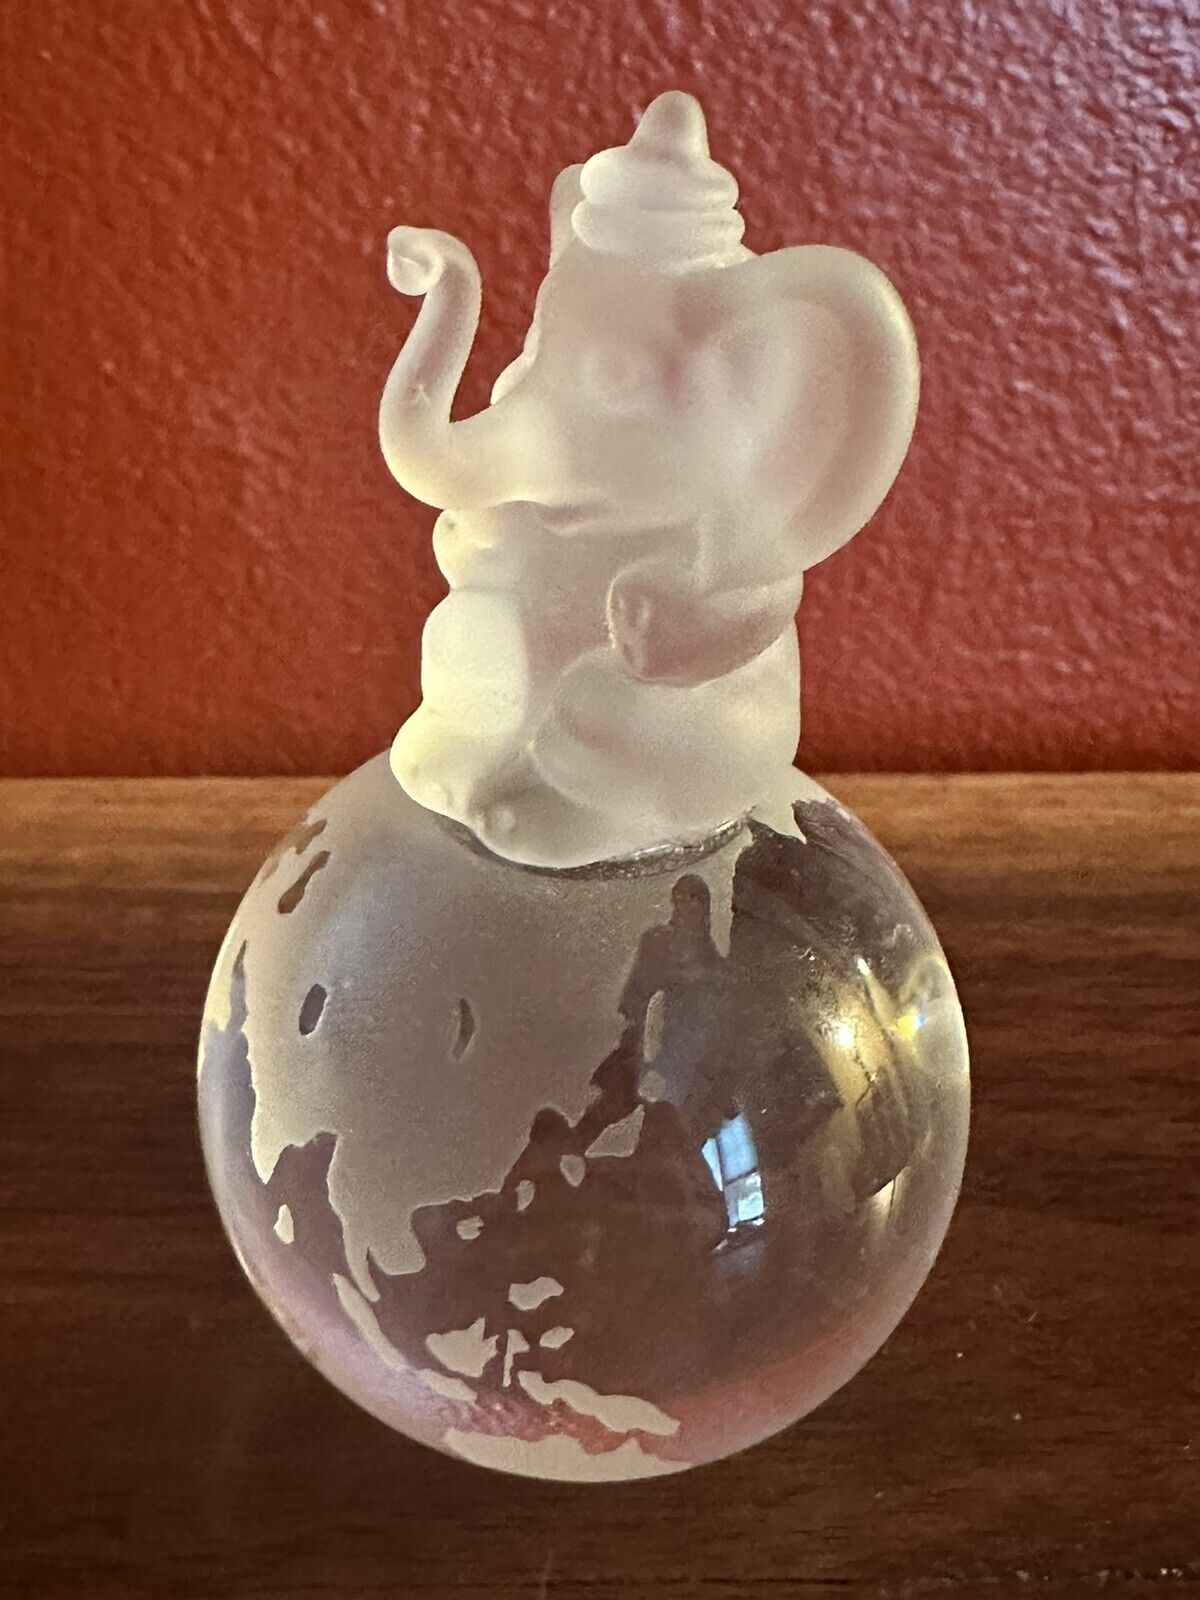 Vintage Disney DUMBO Sitting On Frosted Glass Globe Figurine Paperweight 3.75”